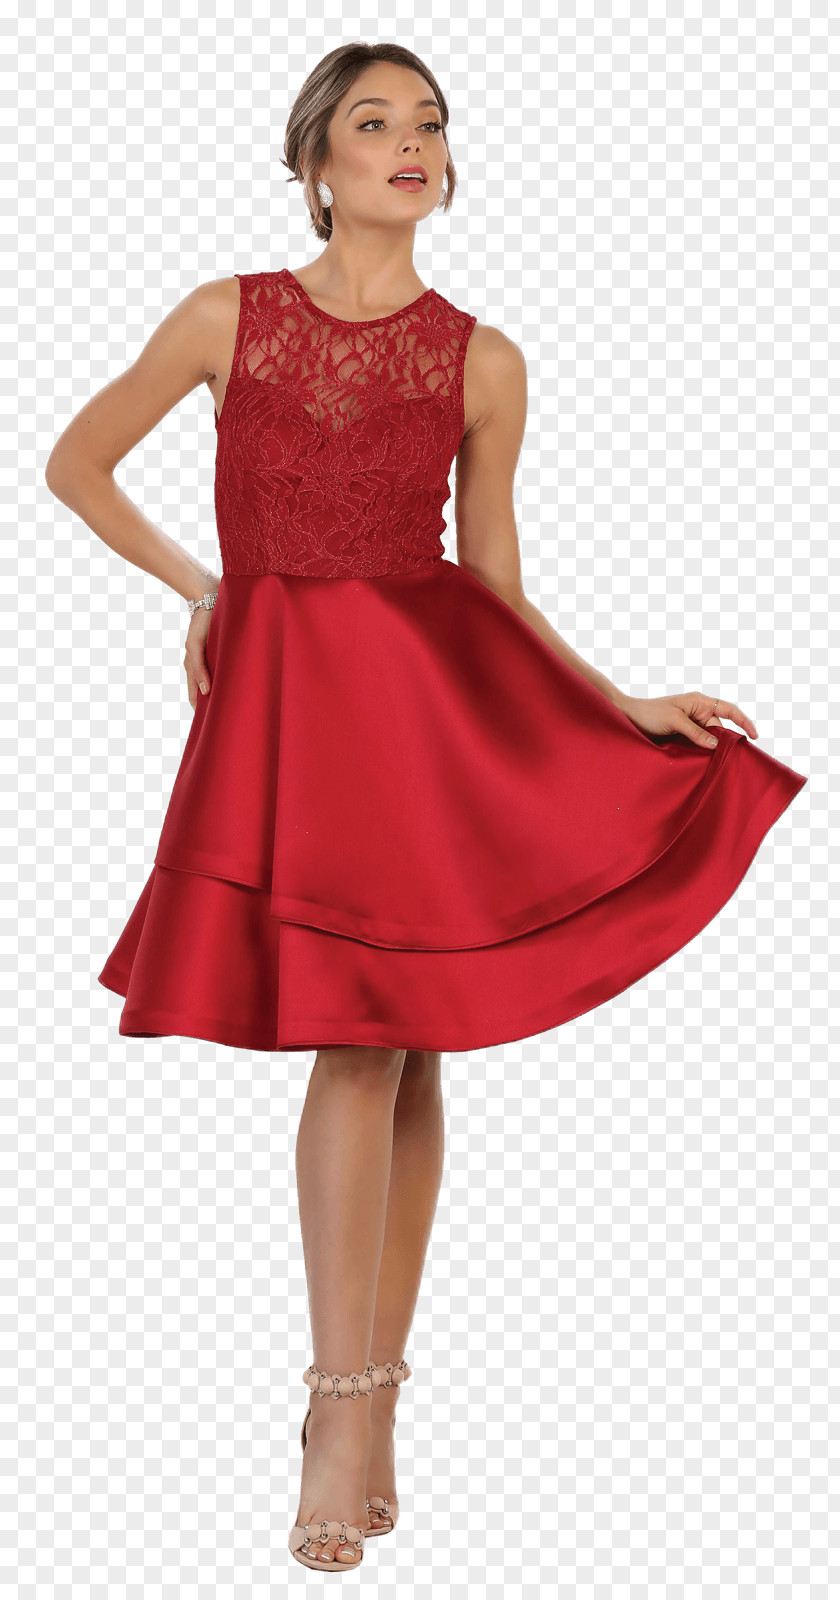 Layered Clothing Cocktail Dress Wedding Prom Ball Gown PNG